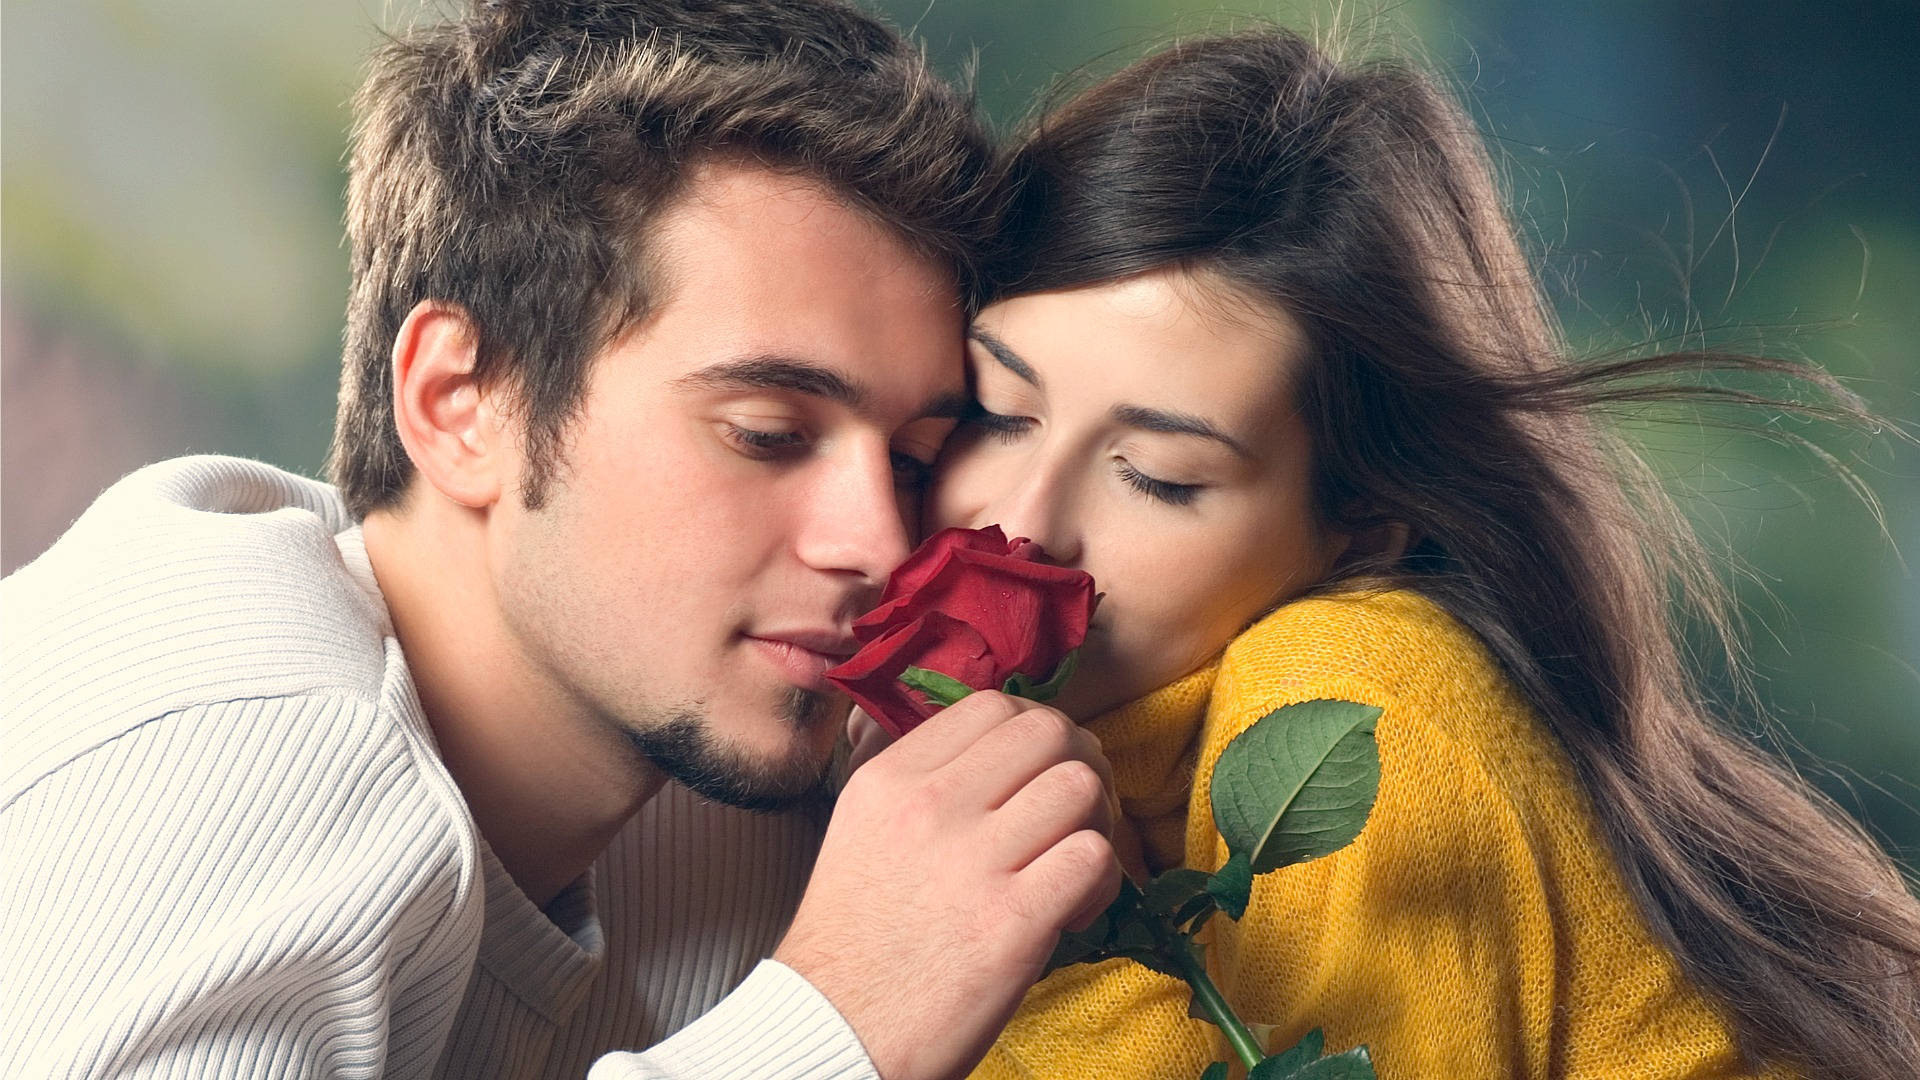 Couple With Rose Romantic Love